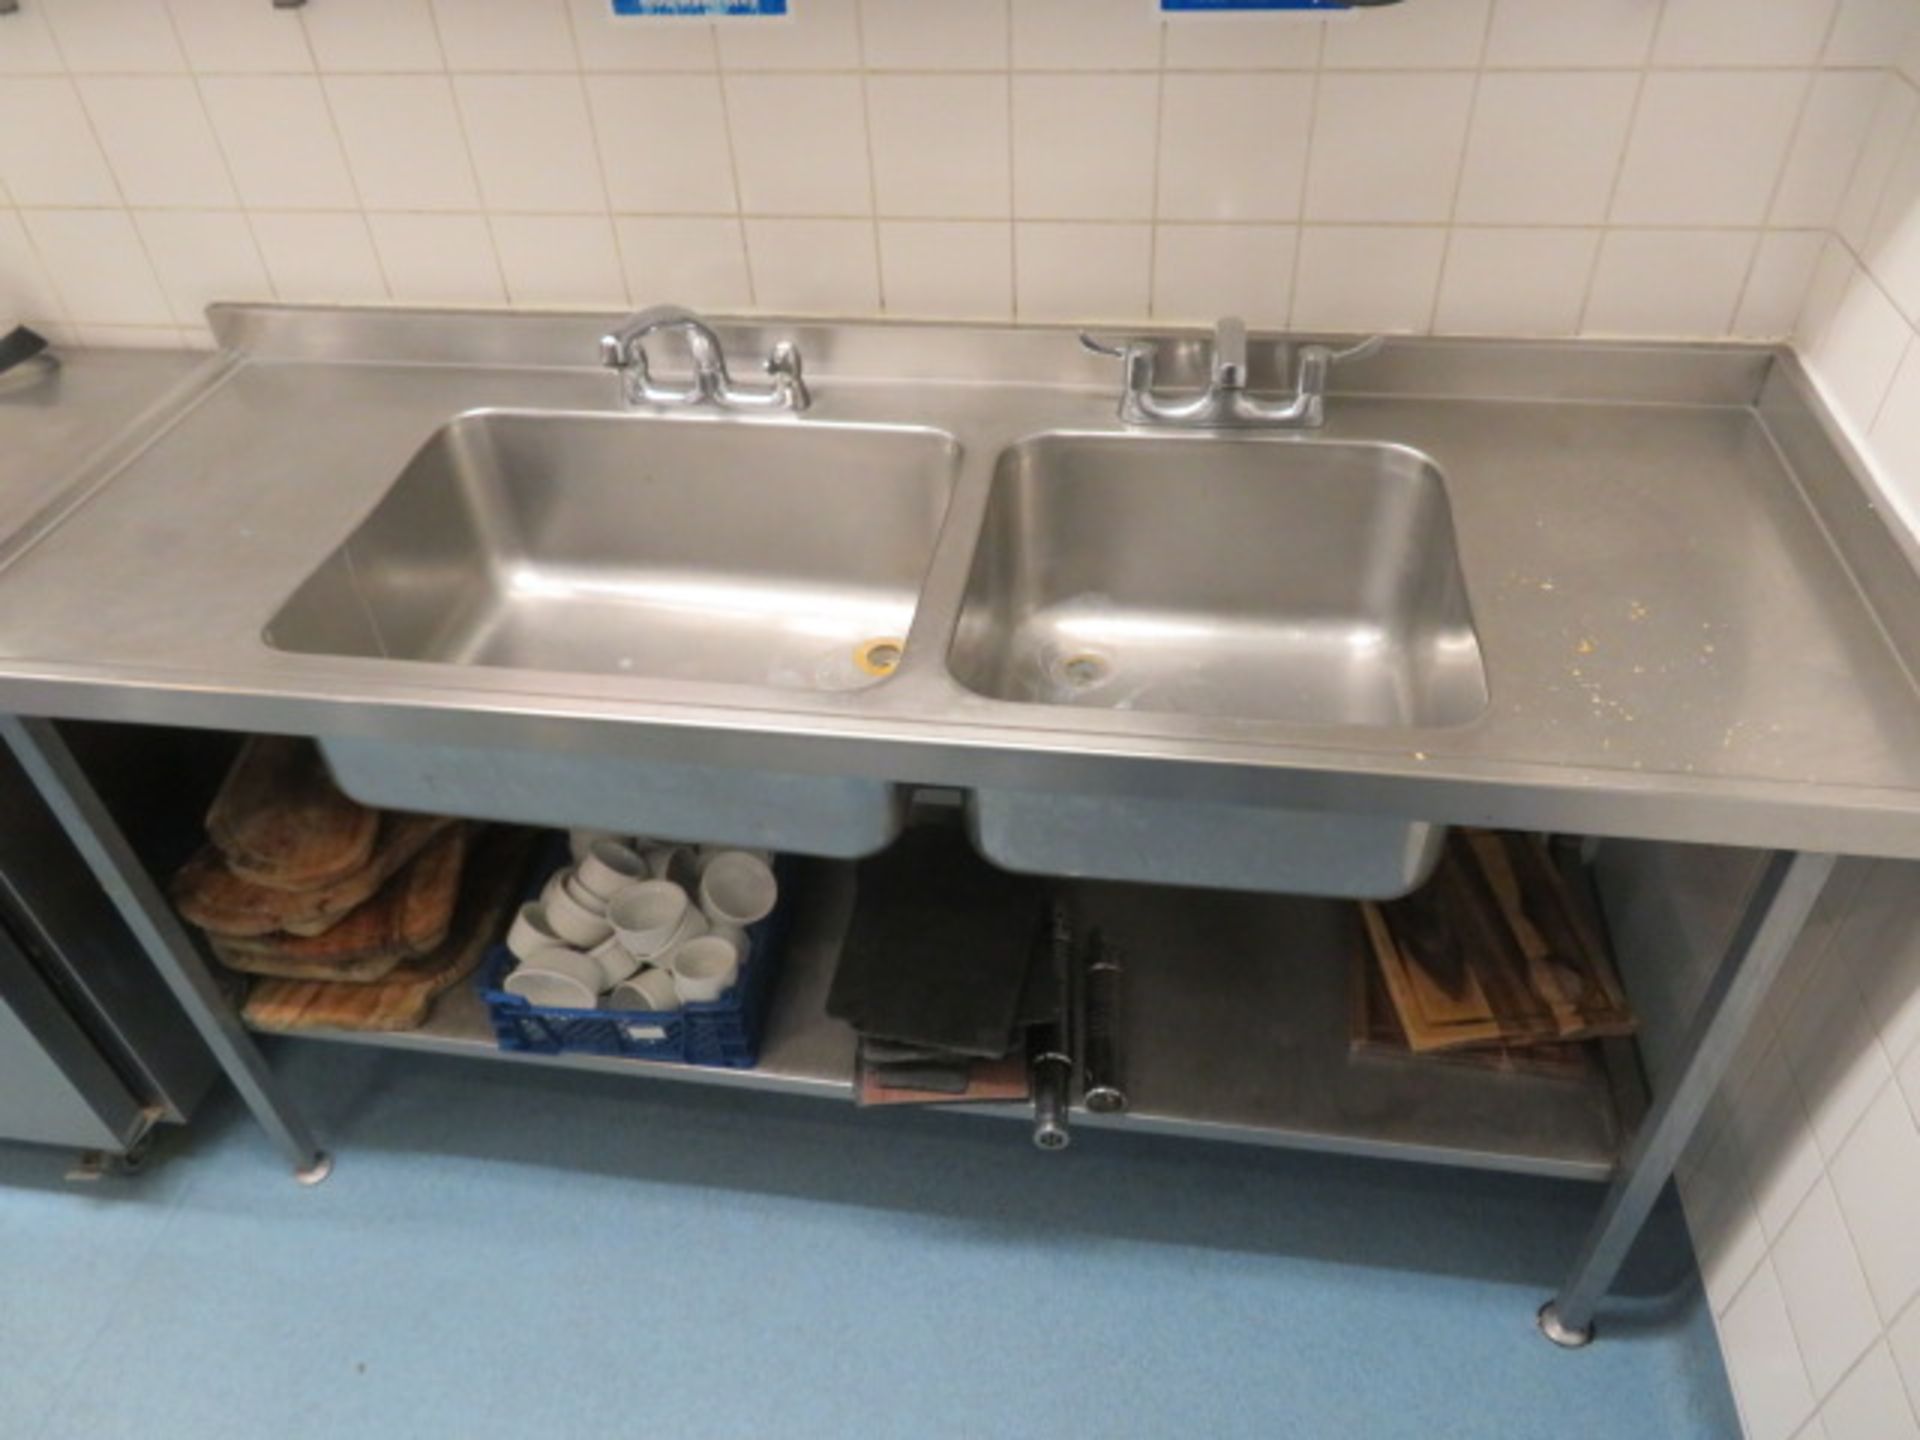 LARGE STAINLESS STEEL DISH WASHING SINKS - CONTENT